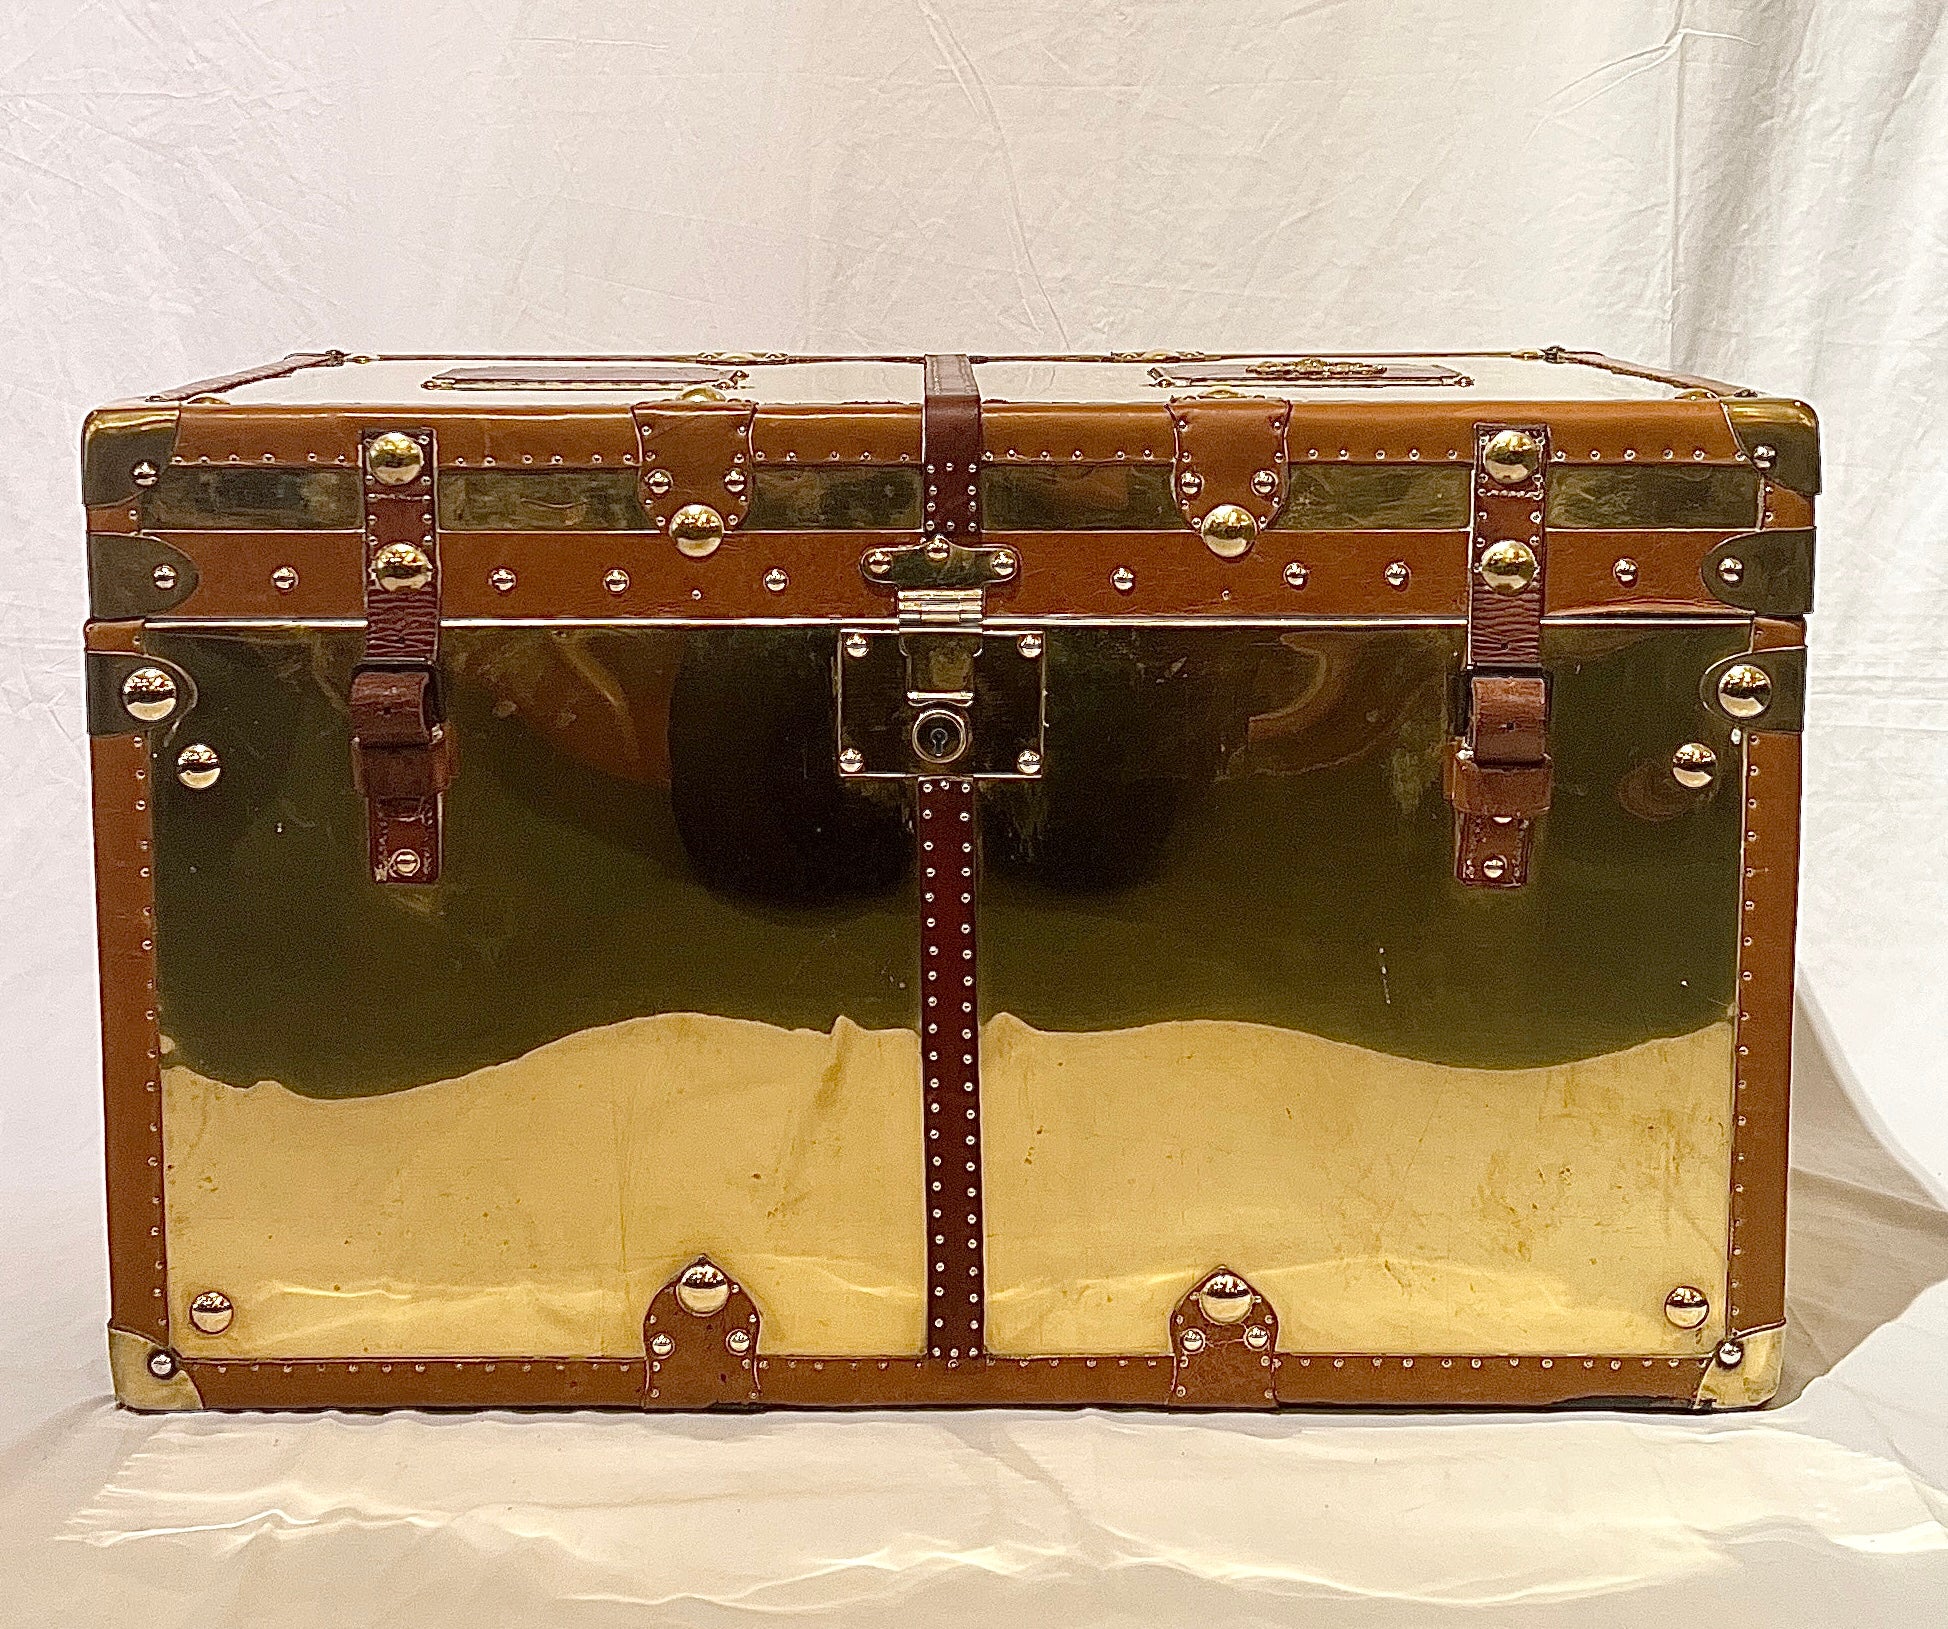 Large Antique British Leather & Brass Military Trunk, Circa 1910's-1920's.
This trunk is from the Home Counties Regiment, part of the Territorial Forces protecting England during both World Wars. In warfare the Regiment was a frontline infantry